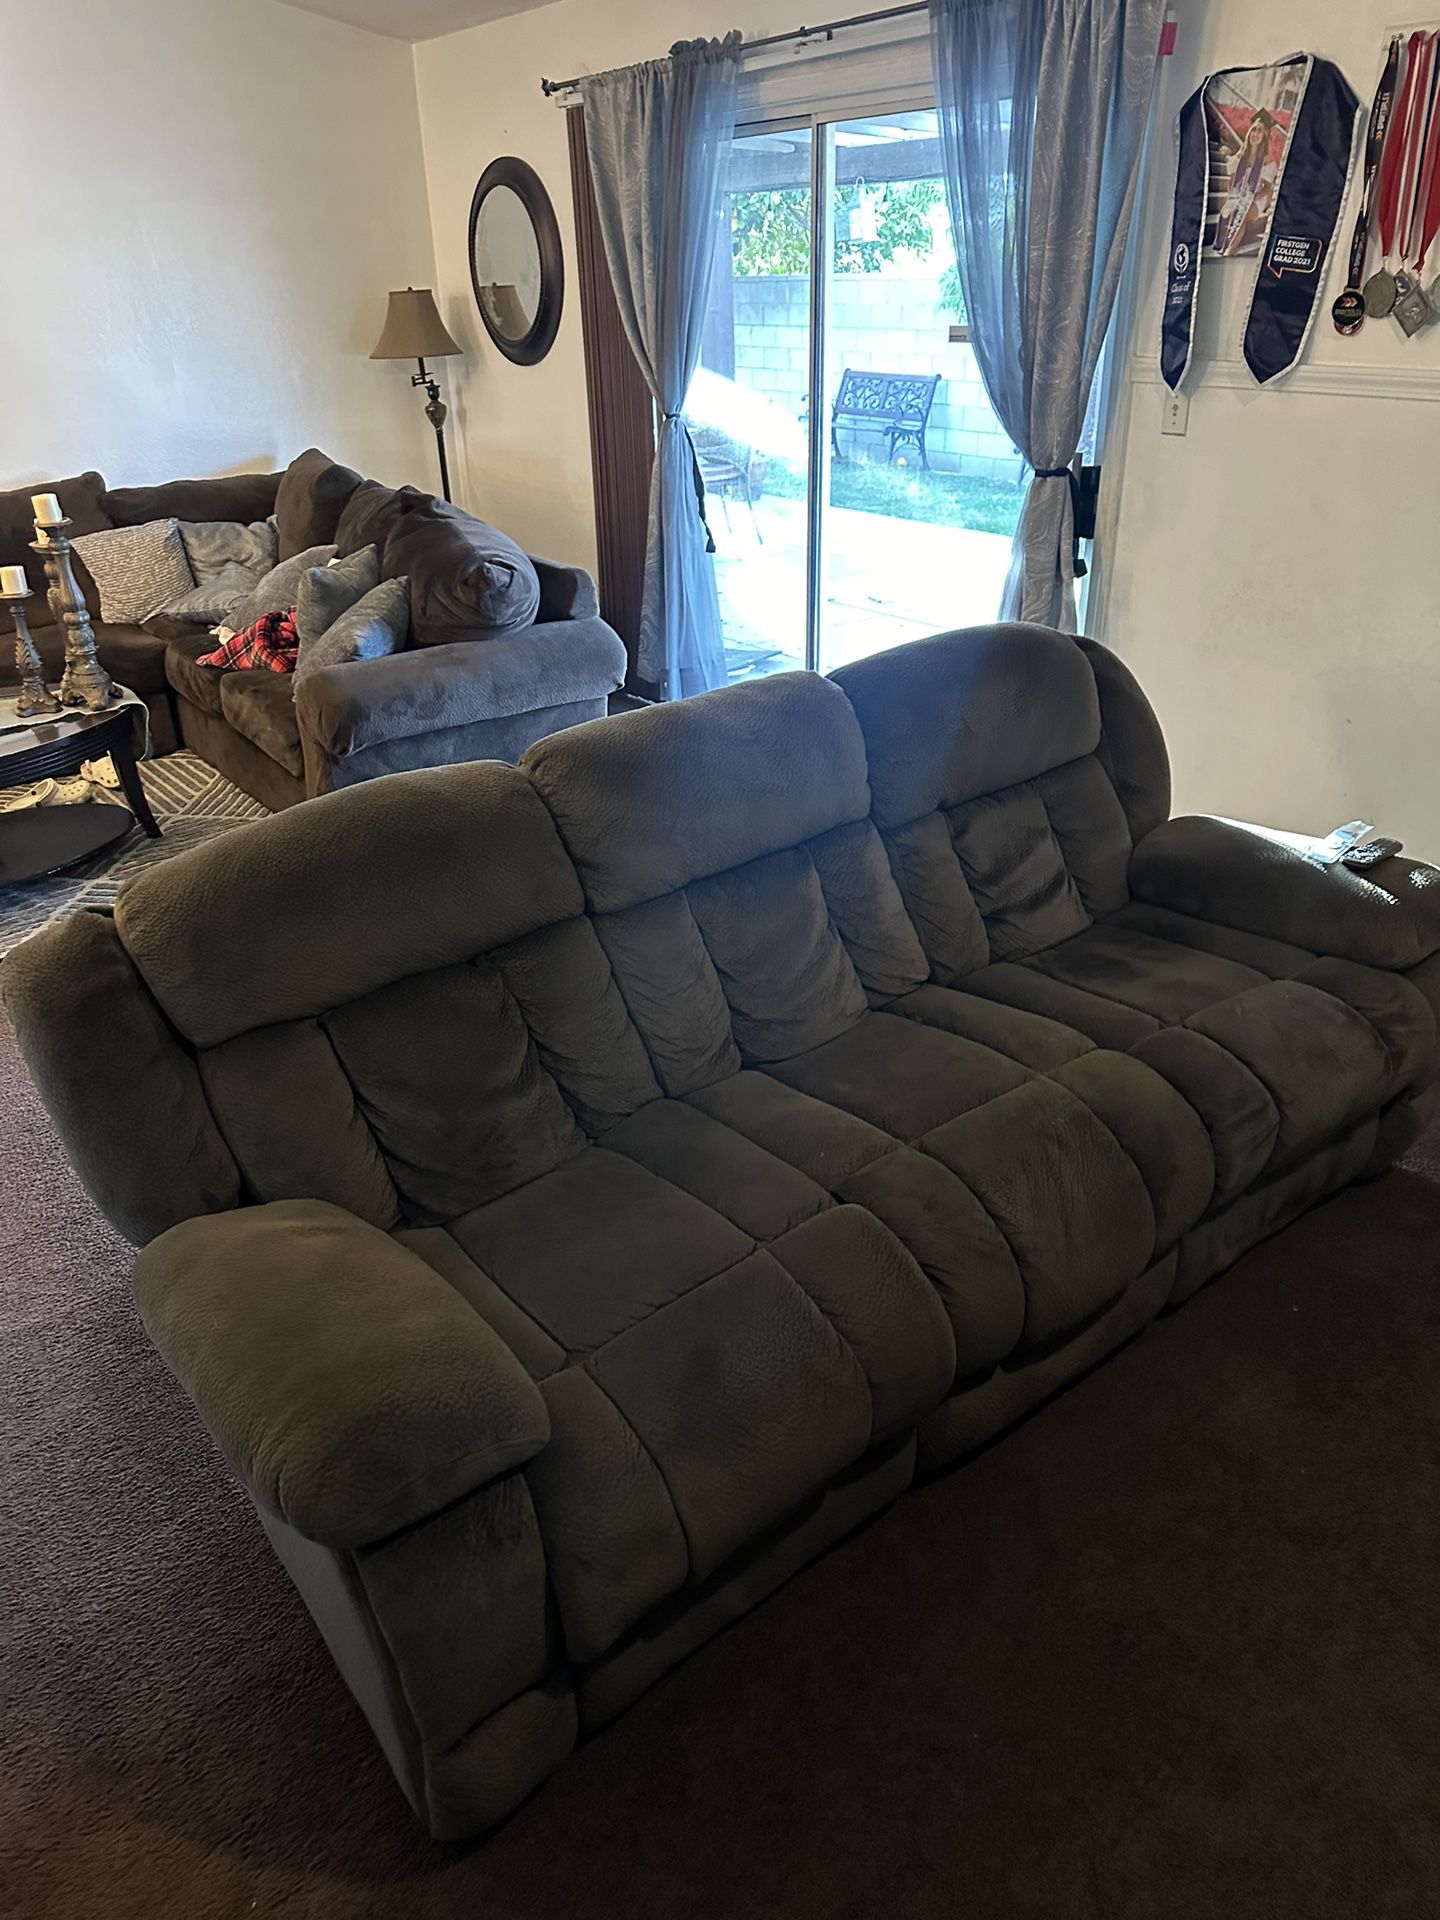 2 Couches For Sale! 